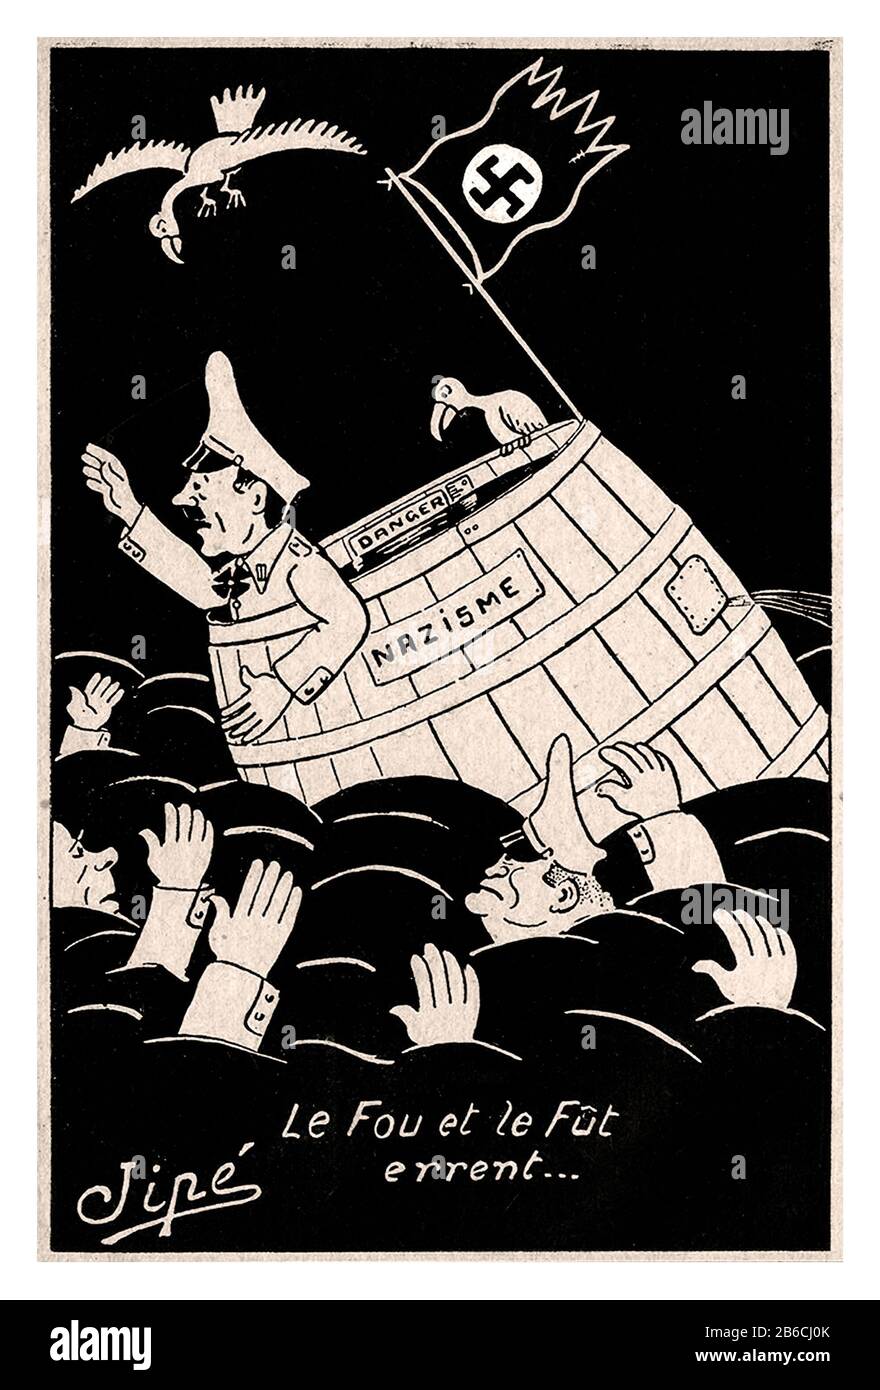 ADOL HITLER CARTOON VINTAGE FRENCH WW2 propaganda card with caricature cartoon Adolf Hitler captioned ‘LE FOU ET LE FÛT ERRENT’ The madman and the keg wander... 1940s France French Artist Jipé World War II WW2 Second World War Stock Photo